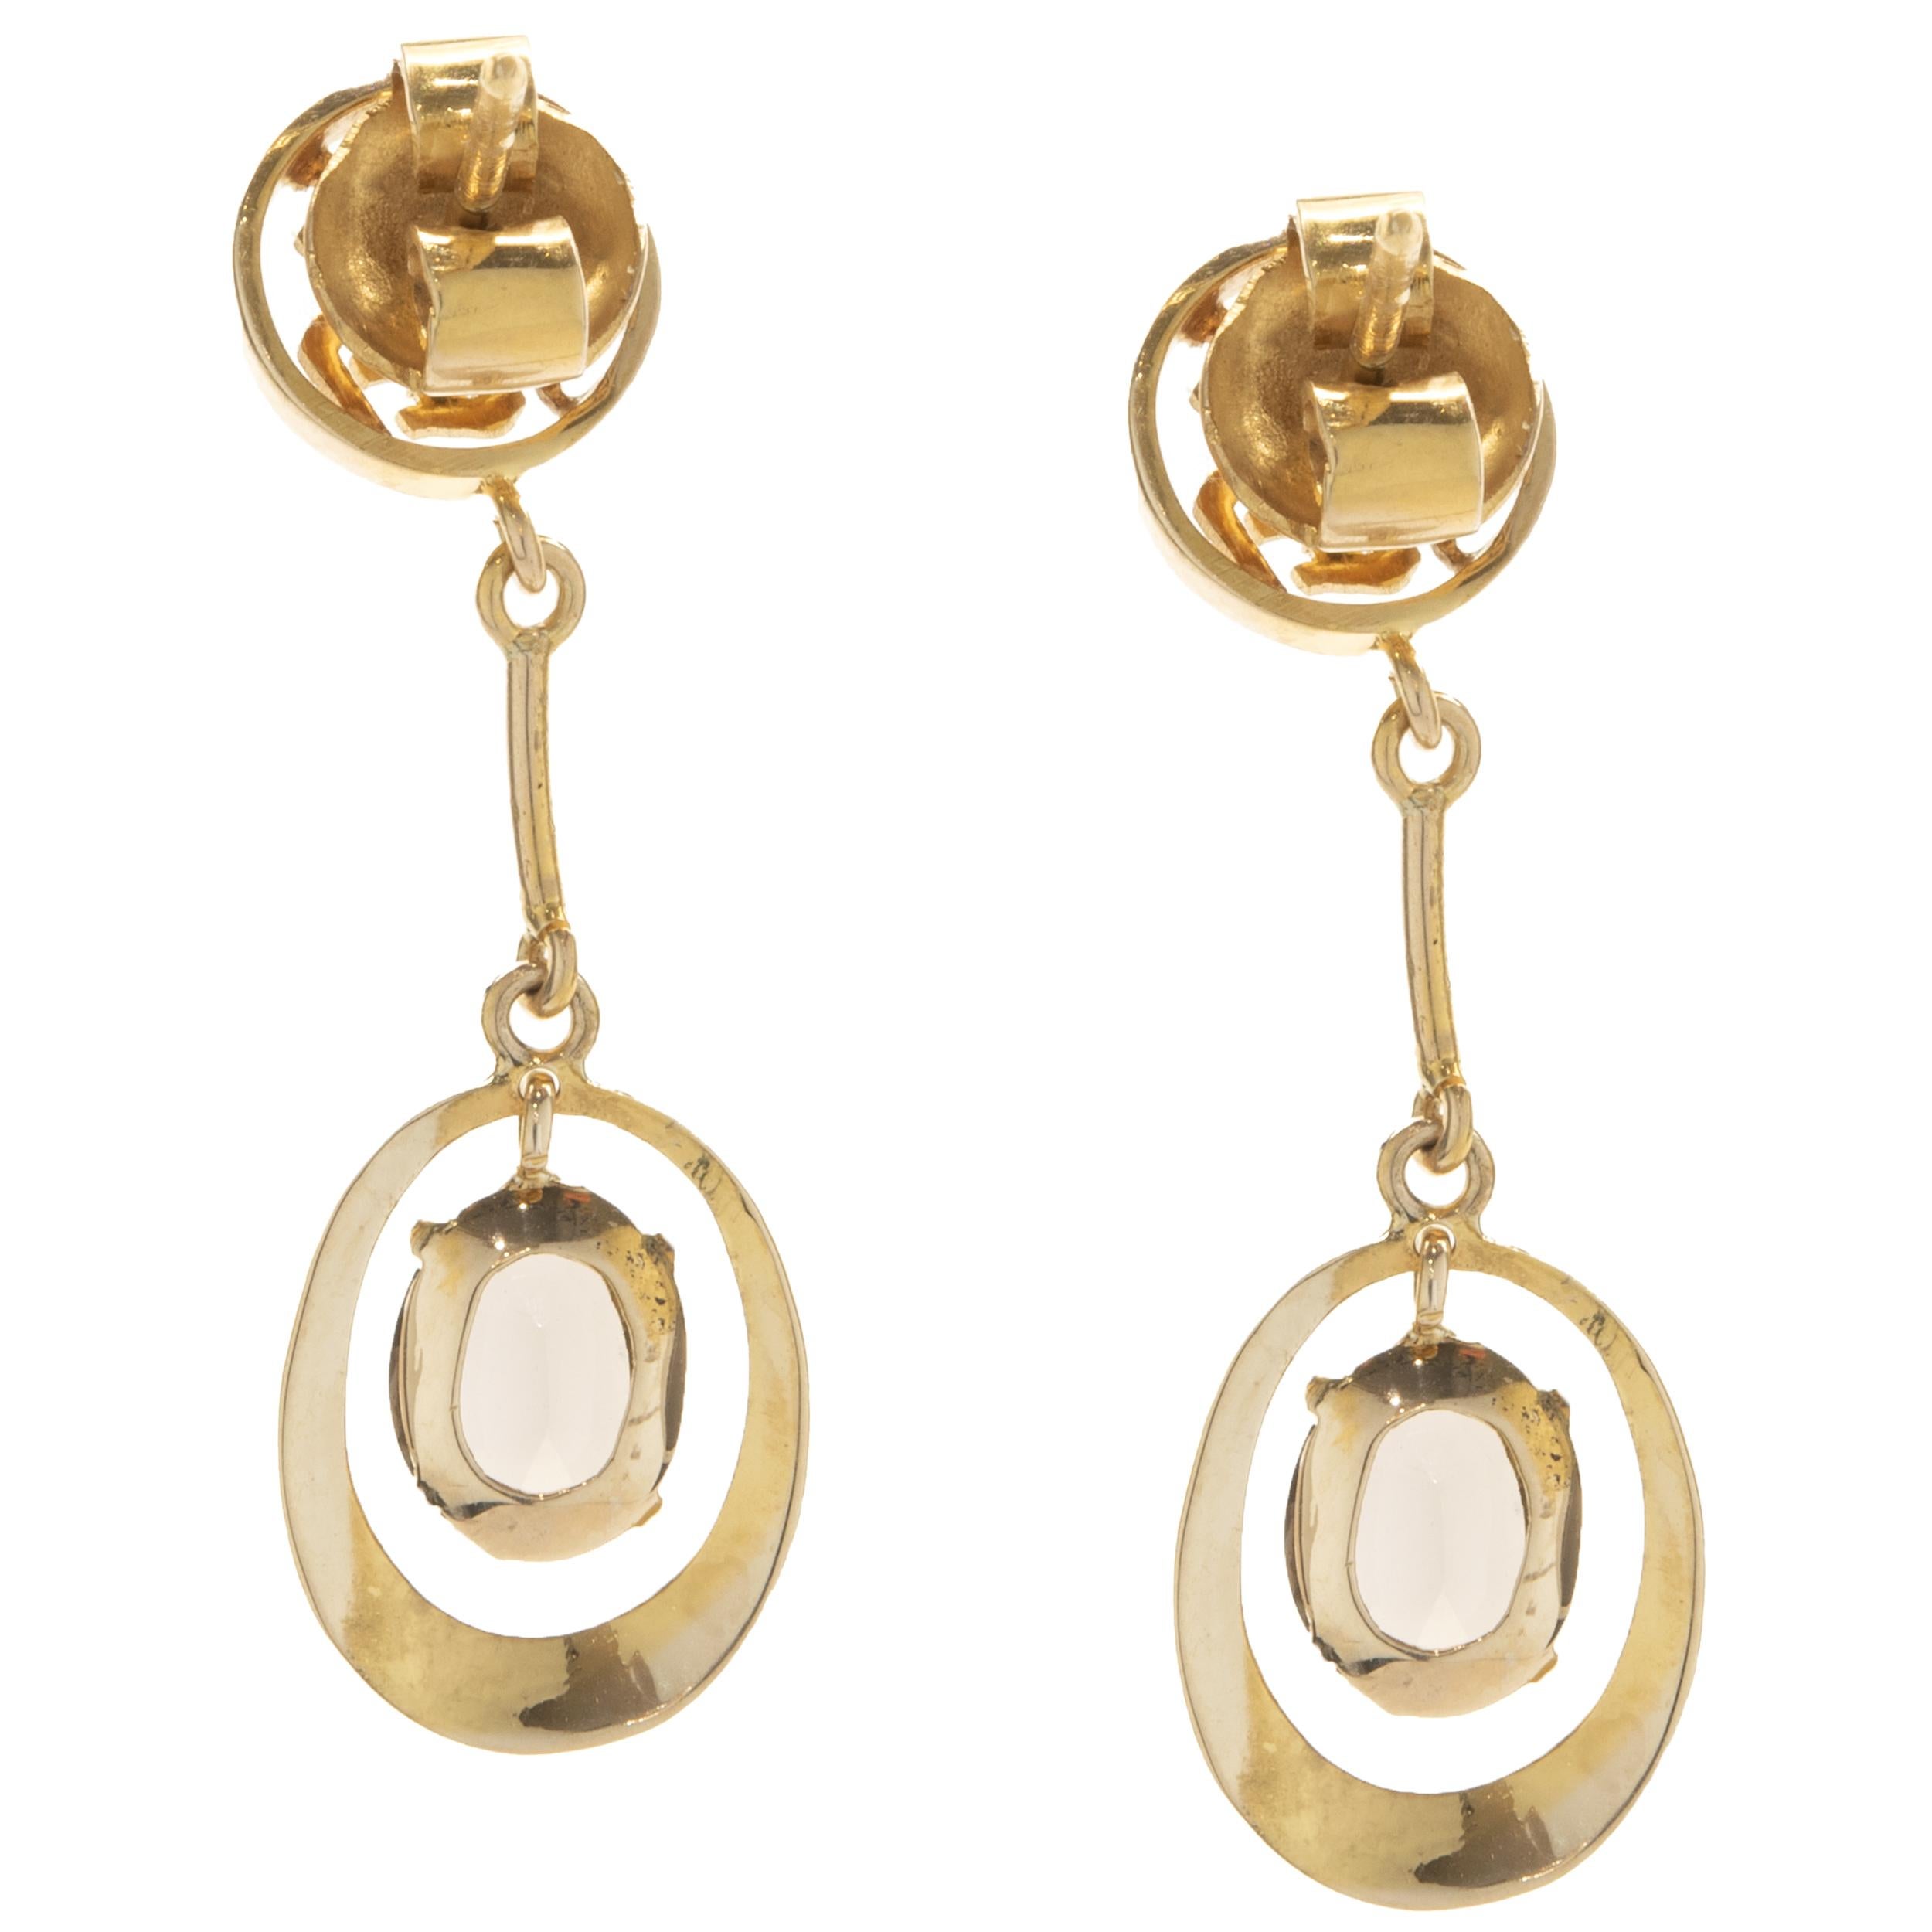 Designer: custom
Material: 14K yellow gold
Dimensions: earrings measure 36mm in length
Fastenings: posts with friction backs
Weight: 4.07 grams